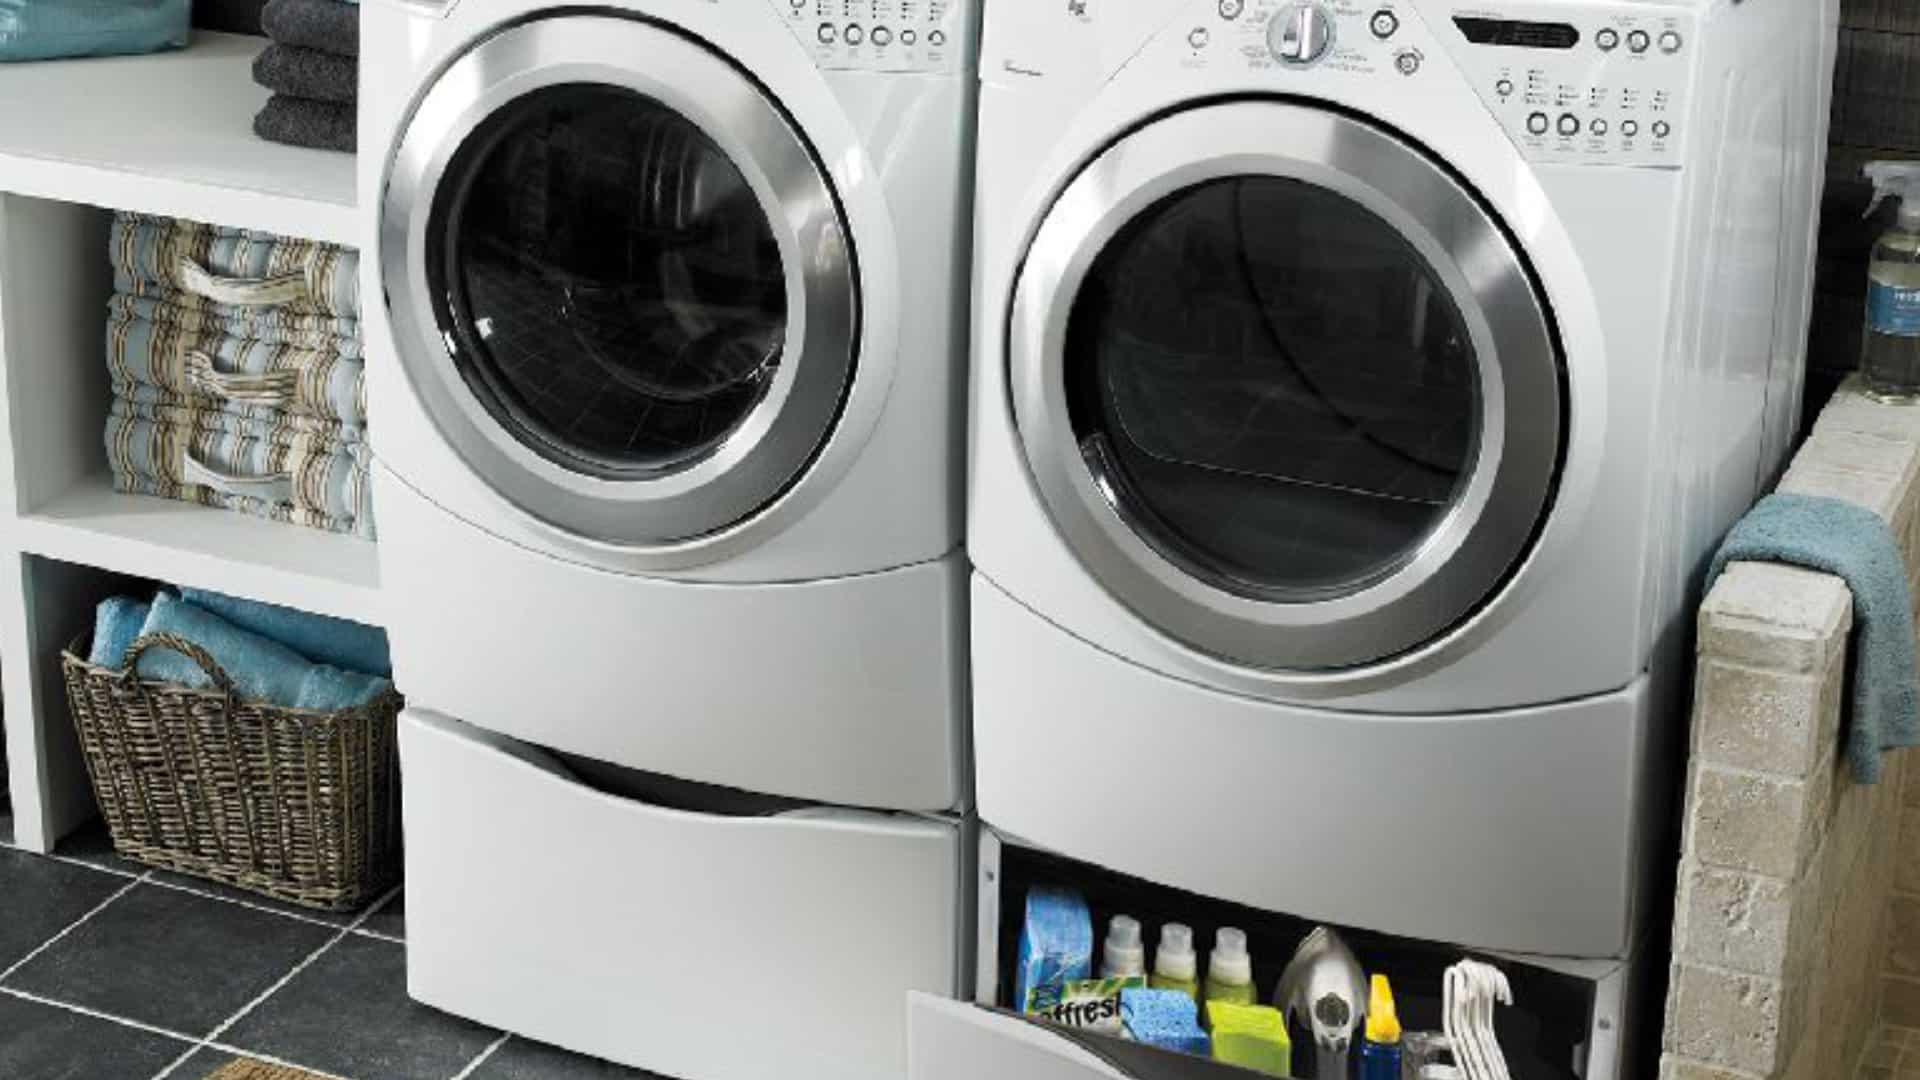 Featured image for “How to Fix the Whirlpool Washer F9 E1 Error Code”